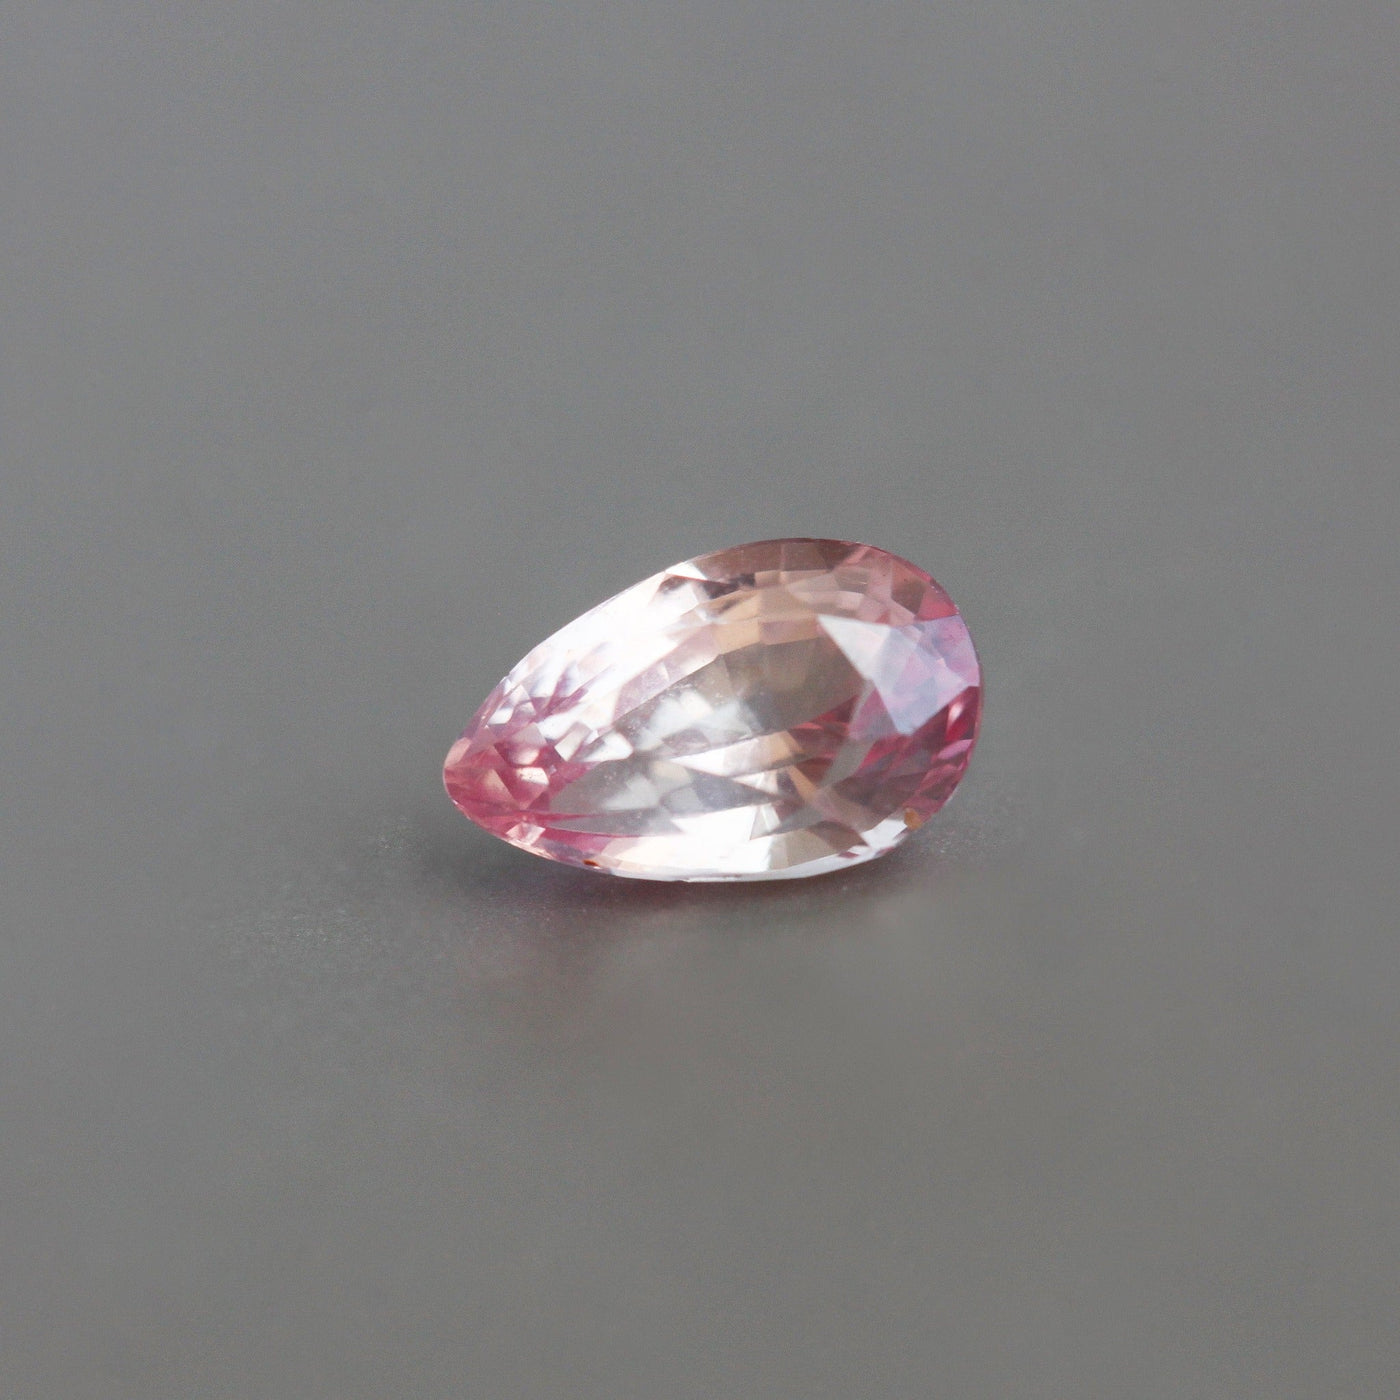 Loose pear-shaped pink and orange sapphire